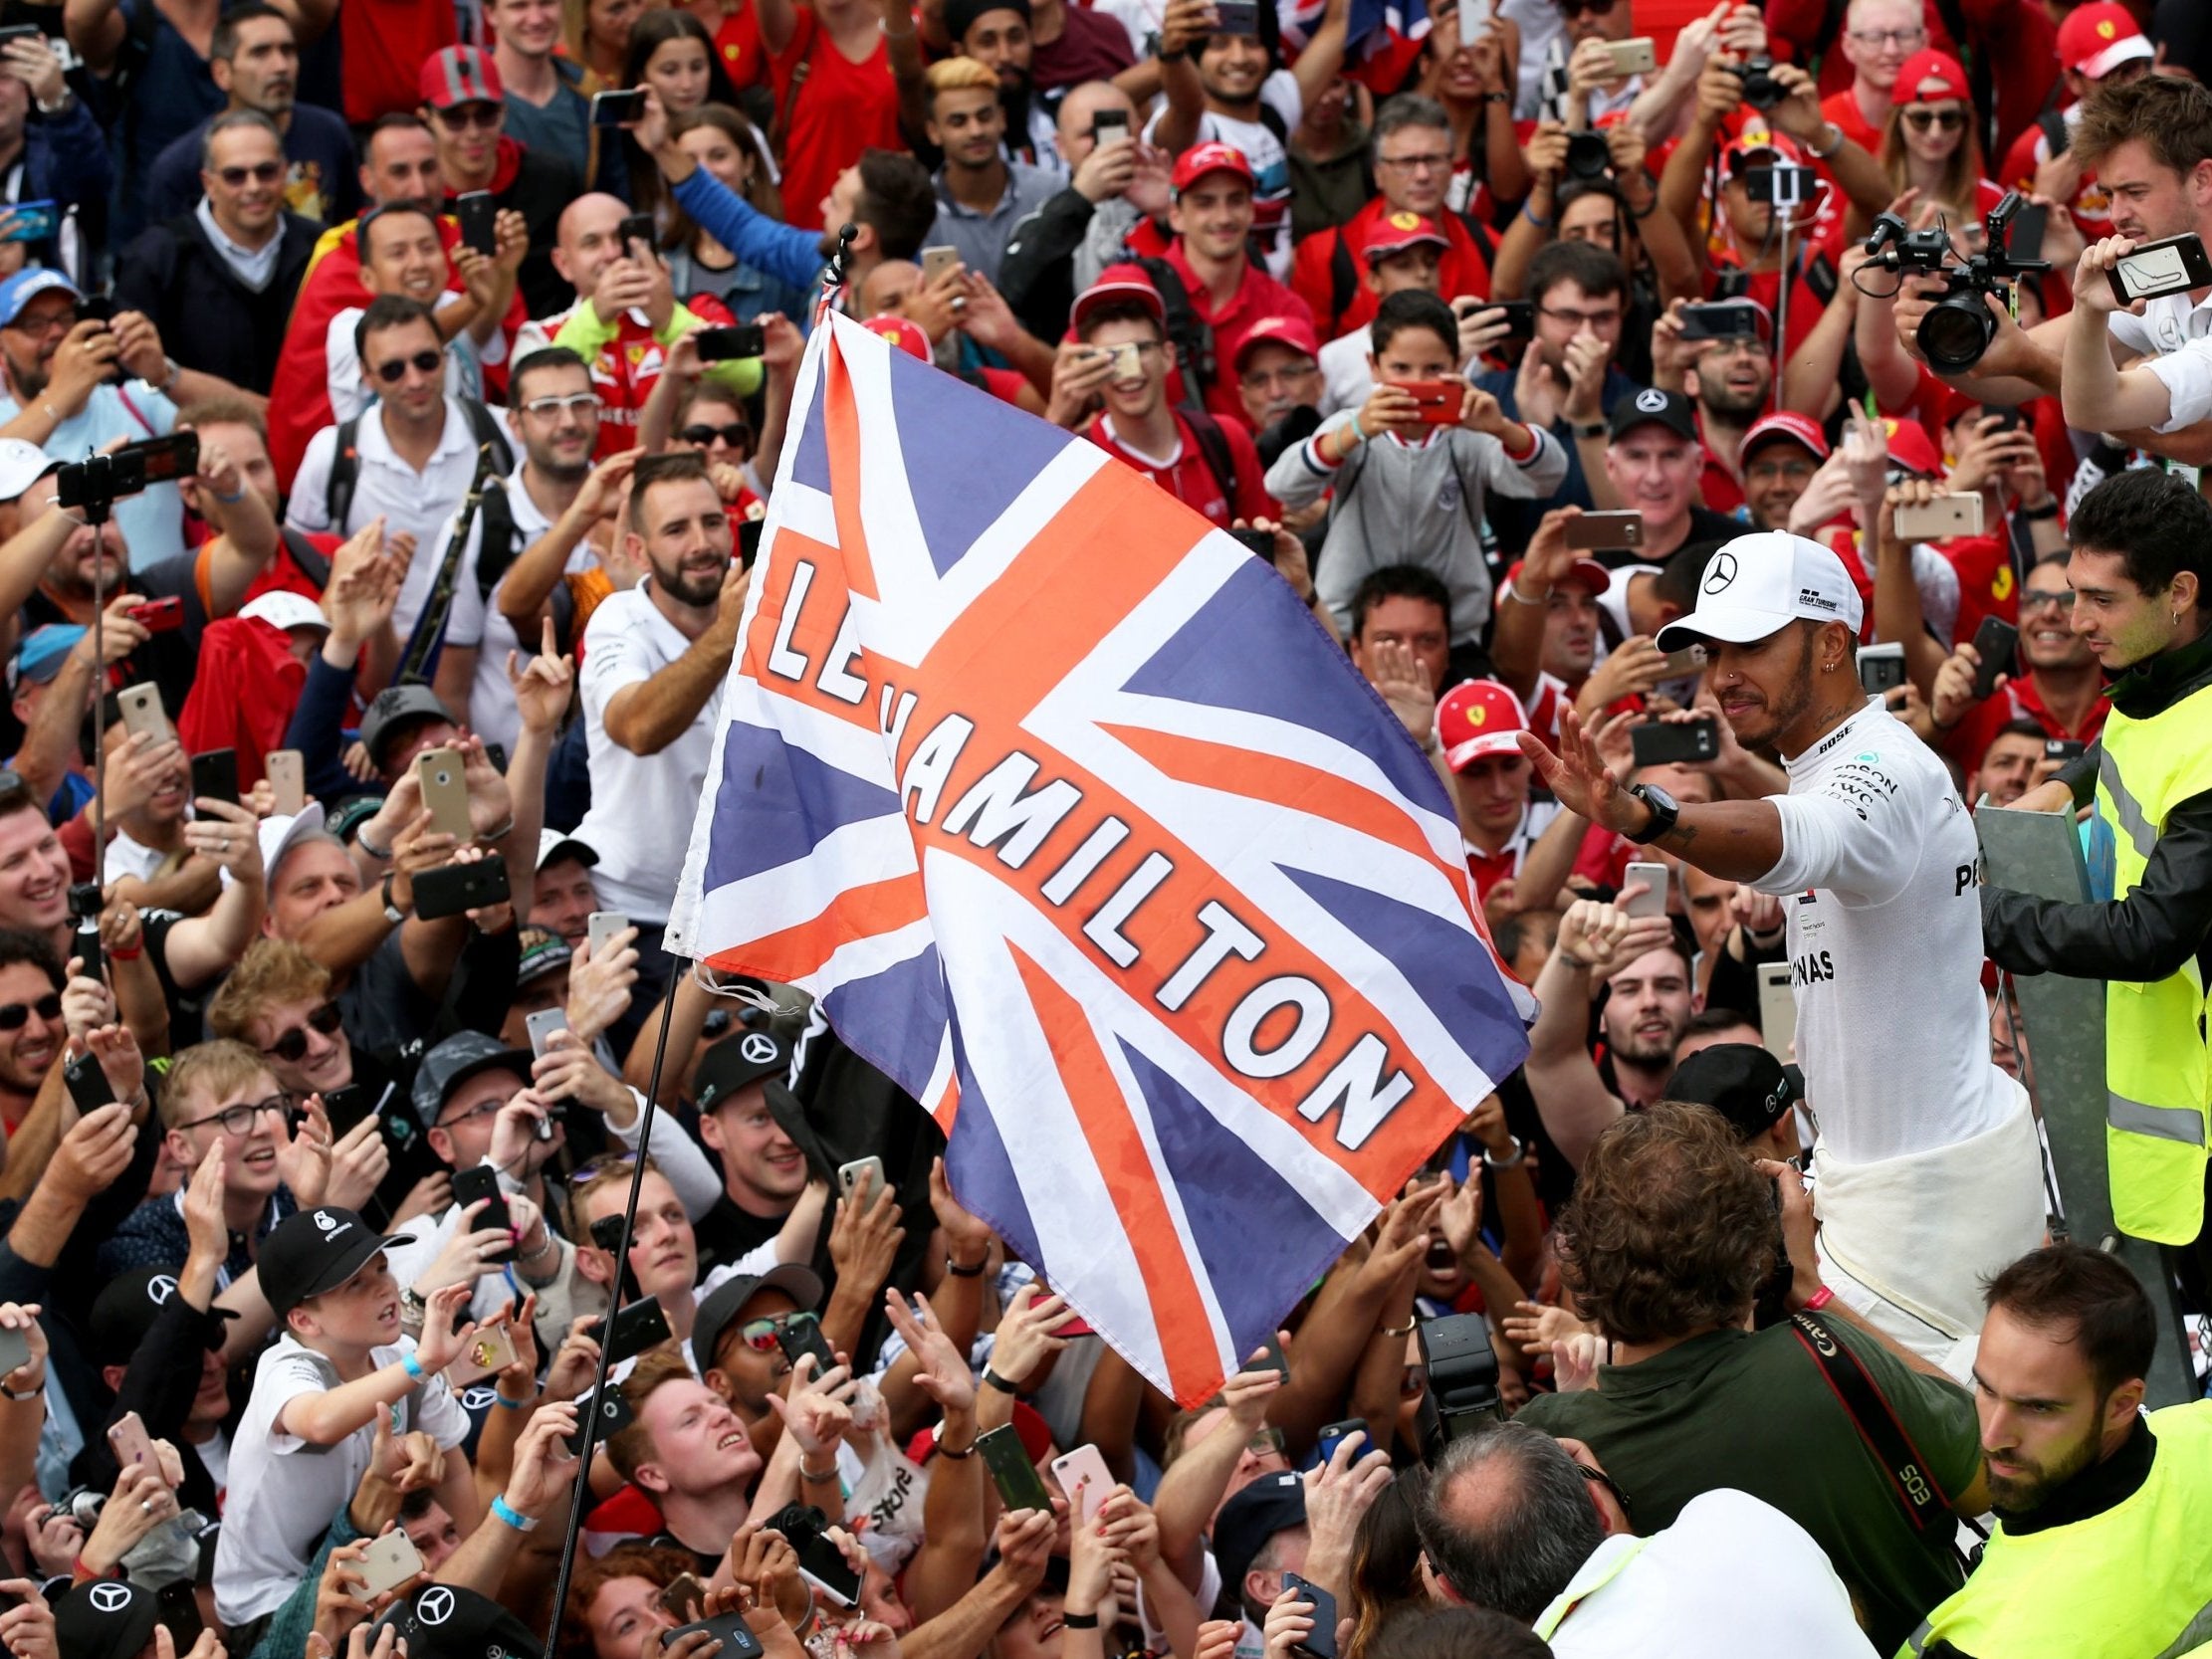 Hamilton praised the support he received from British fans at Monza